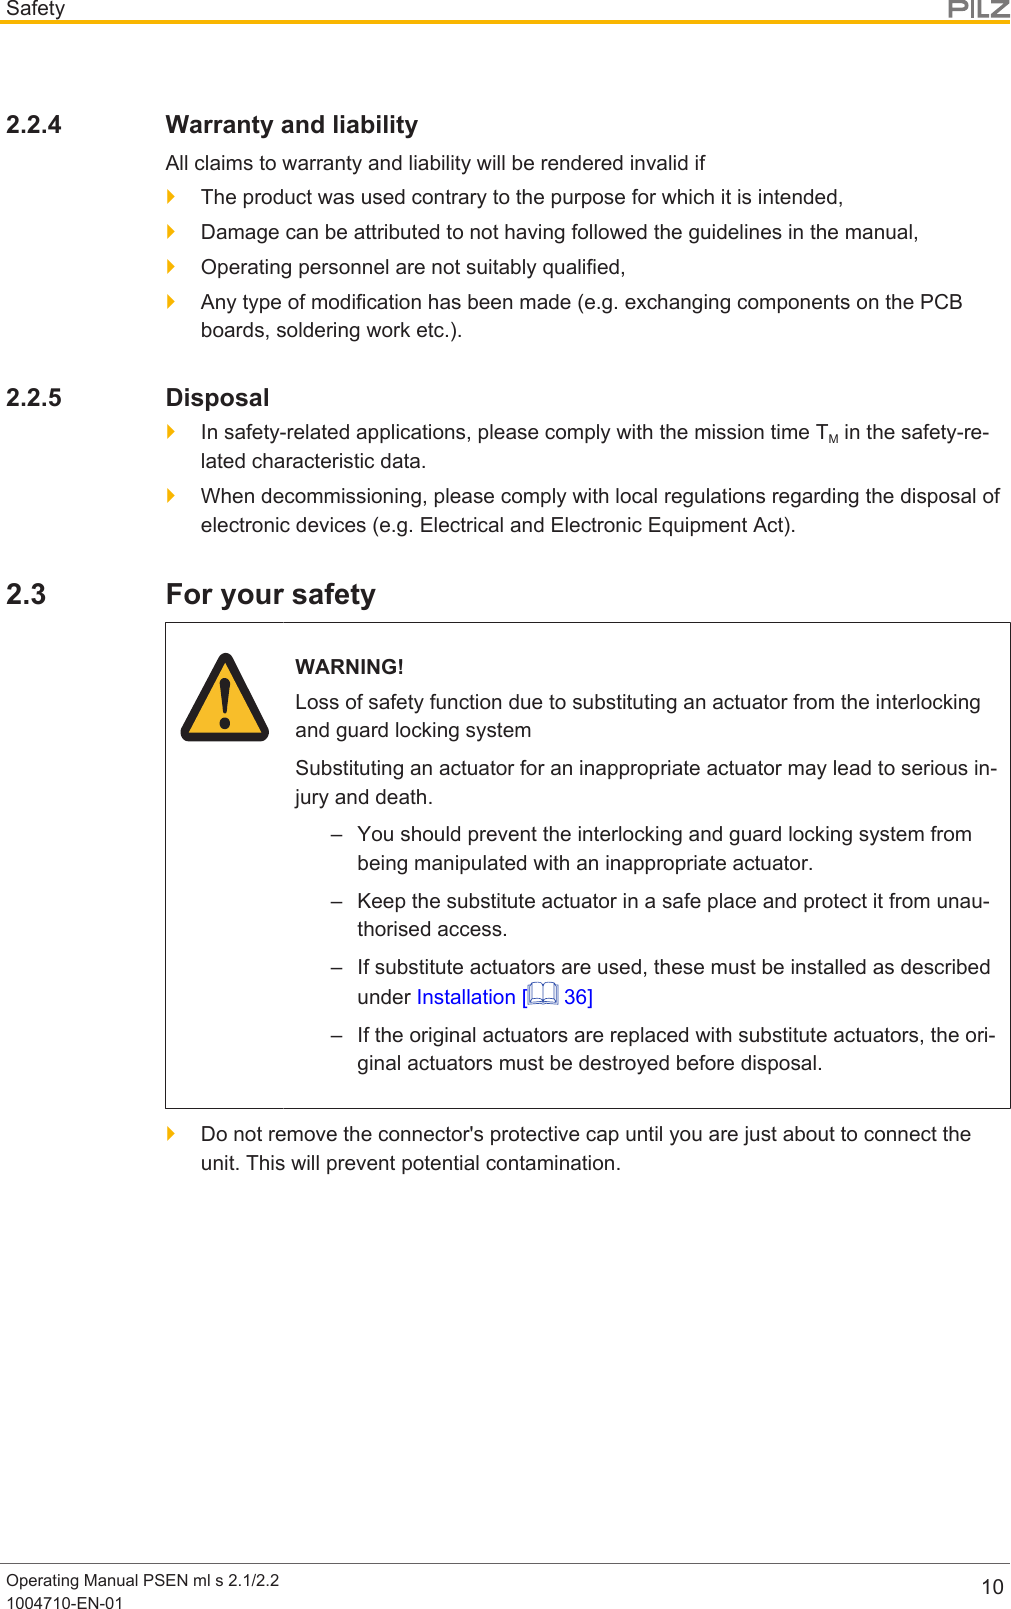 SafetyOperating Manual PSEN ml s 2.1/2.21004710-EN-01 102.2.4 Warranty and liabilityAll claims to warranty and liability will be rendered invalid if}The product was used contrary to the purpose for which it is intended,}Damage can be attributed to not having followed the guidelines in the manual,}Operating personnel are not suitably qualified,}Any type of modification has been made (e.g. exchanging components on the PCBboards, soldering work etc.).2.2.5 Disposal}In safety-related applications, please comply with the mission time TM in the safety-re-lated characteristic data.}When decommissioning, please comply with local regulations regarding the disposal ofelectronic devices (e.g. Electrical and Electronic Equipment Act).2.3 For your safetyWARNING!Loss of safety function due to substituting an actuator from the interlockingand guard locking systemSubstituting an actuator for an inappropriate actuator may lead to serious in-jury and death.– You should prevent the interlocking and guard locking system frombeing manipulated with an inappropriate actuator.– Keep the substitute actuator in a safe place and protect it from unau-thorised access.– If substitute actuators are used, these must be installed as describedunder Installation [  36]– If the original actuators are replaced with substitute actuators, the ori-ginal actuators must be destroyed before disposal.}Do not remove the connector&apos;s protective cap until you are just about to connect theunit. This will prevent potential contamination.